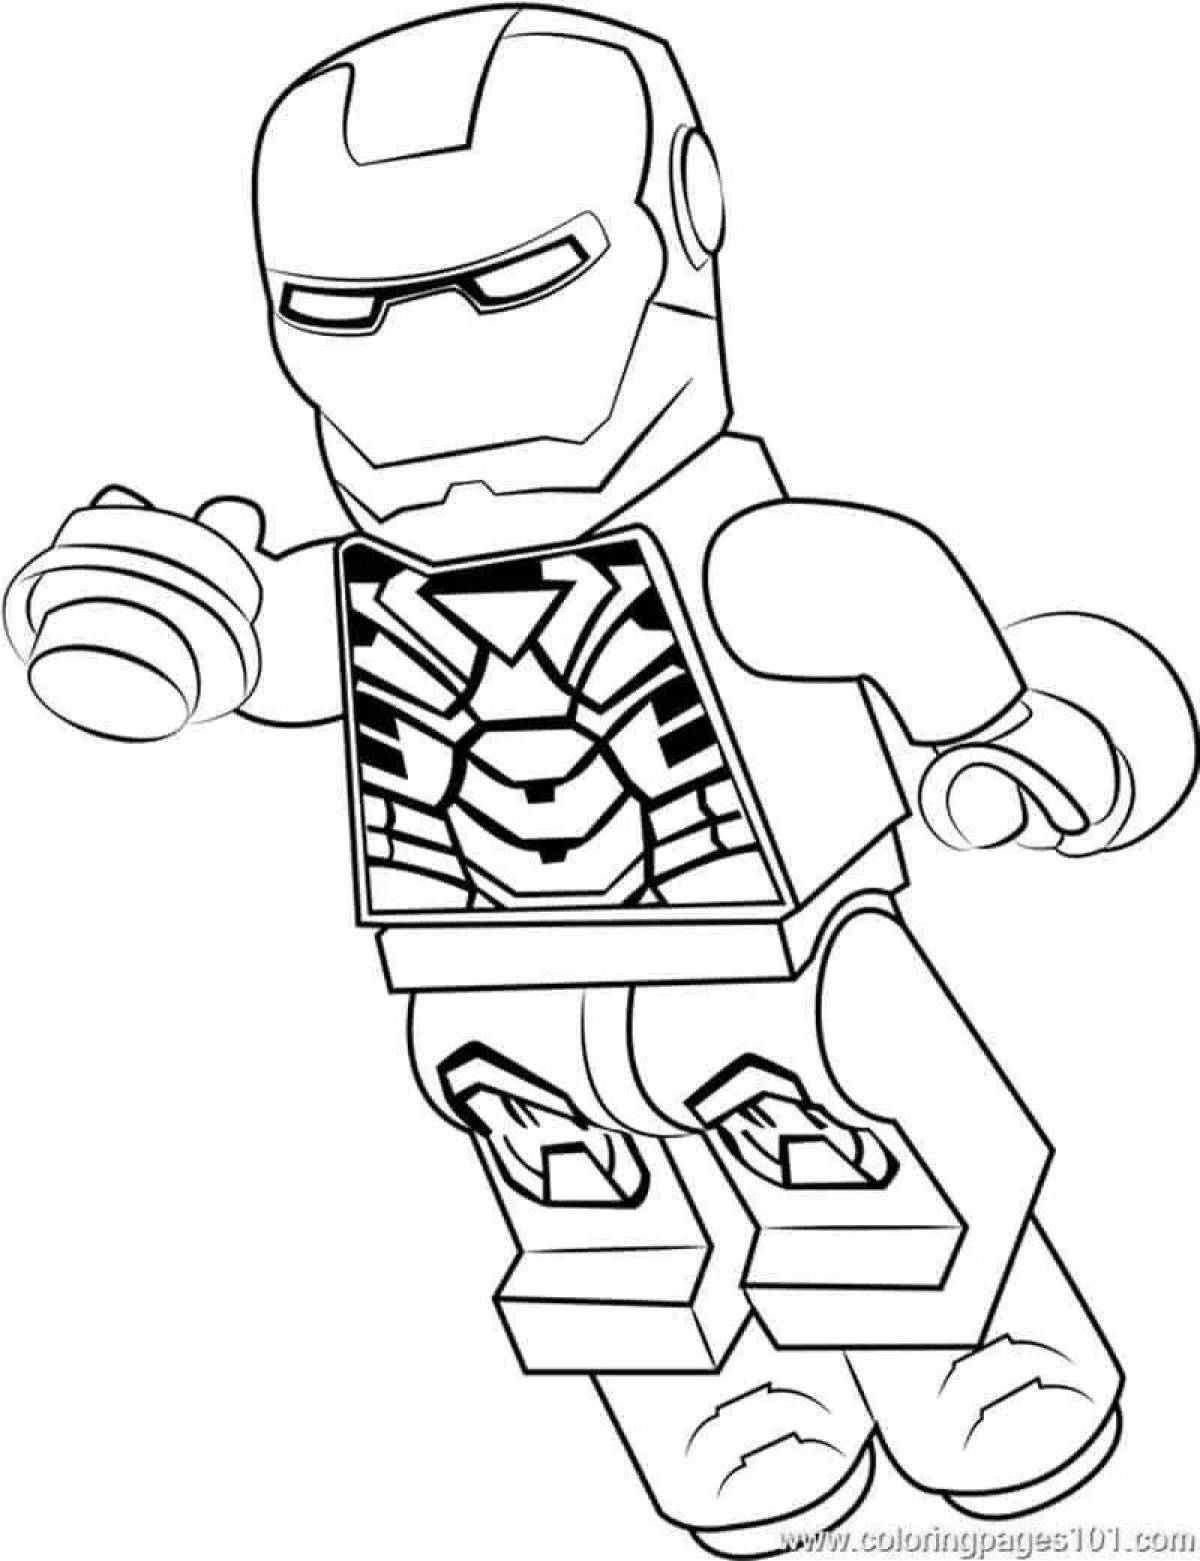 Playful lego man coloring page